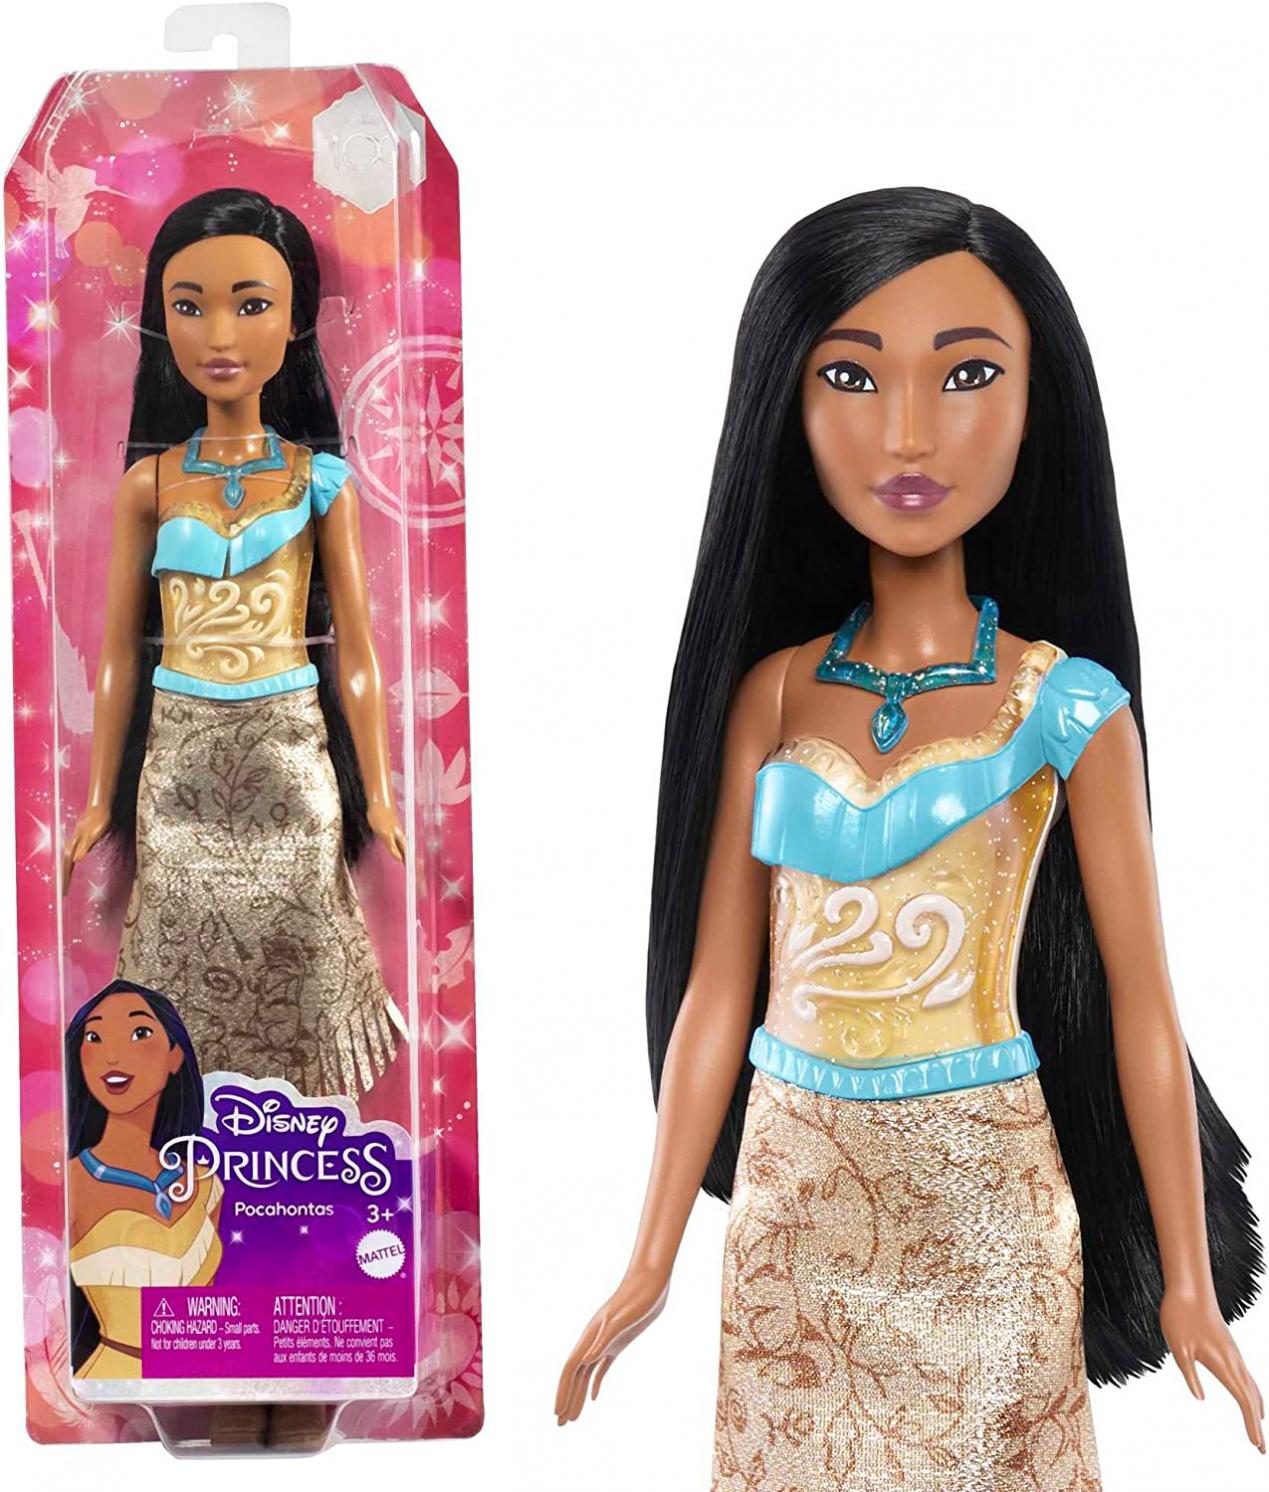 Disney Princess Pochontas Fashion Doll, New for 2023, Sparkling Look with Black Hair, Brown Eyes & Necklace Accessory